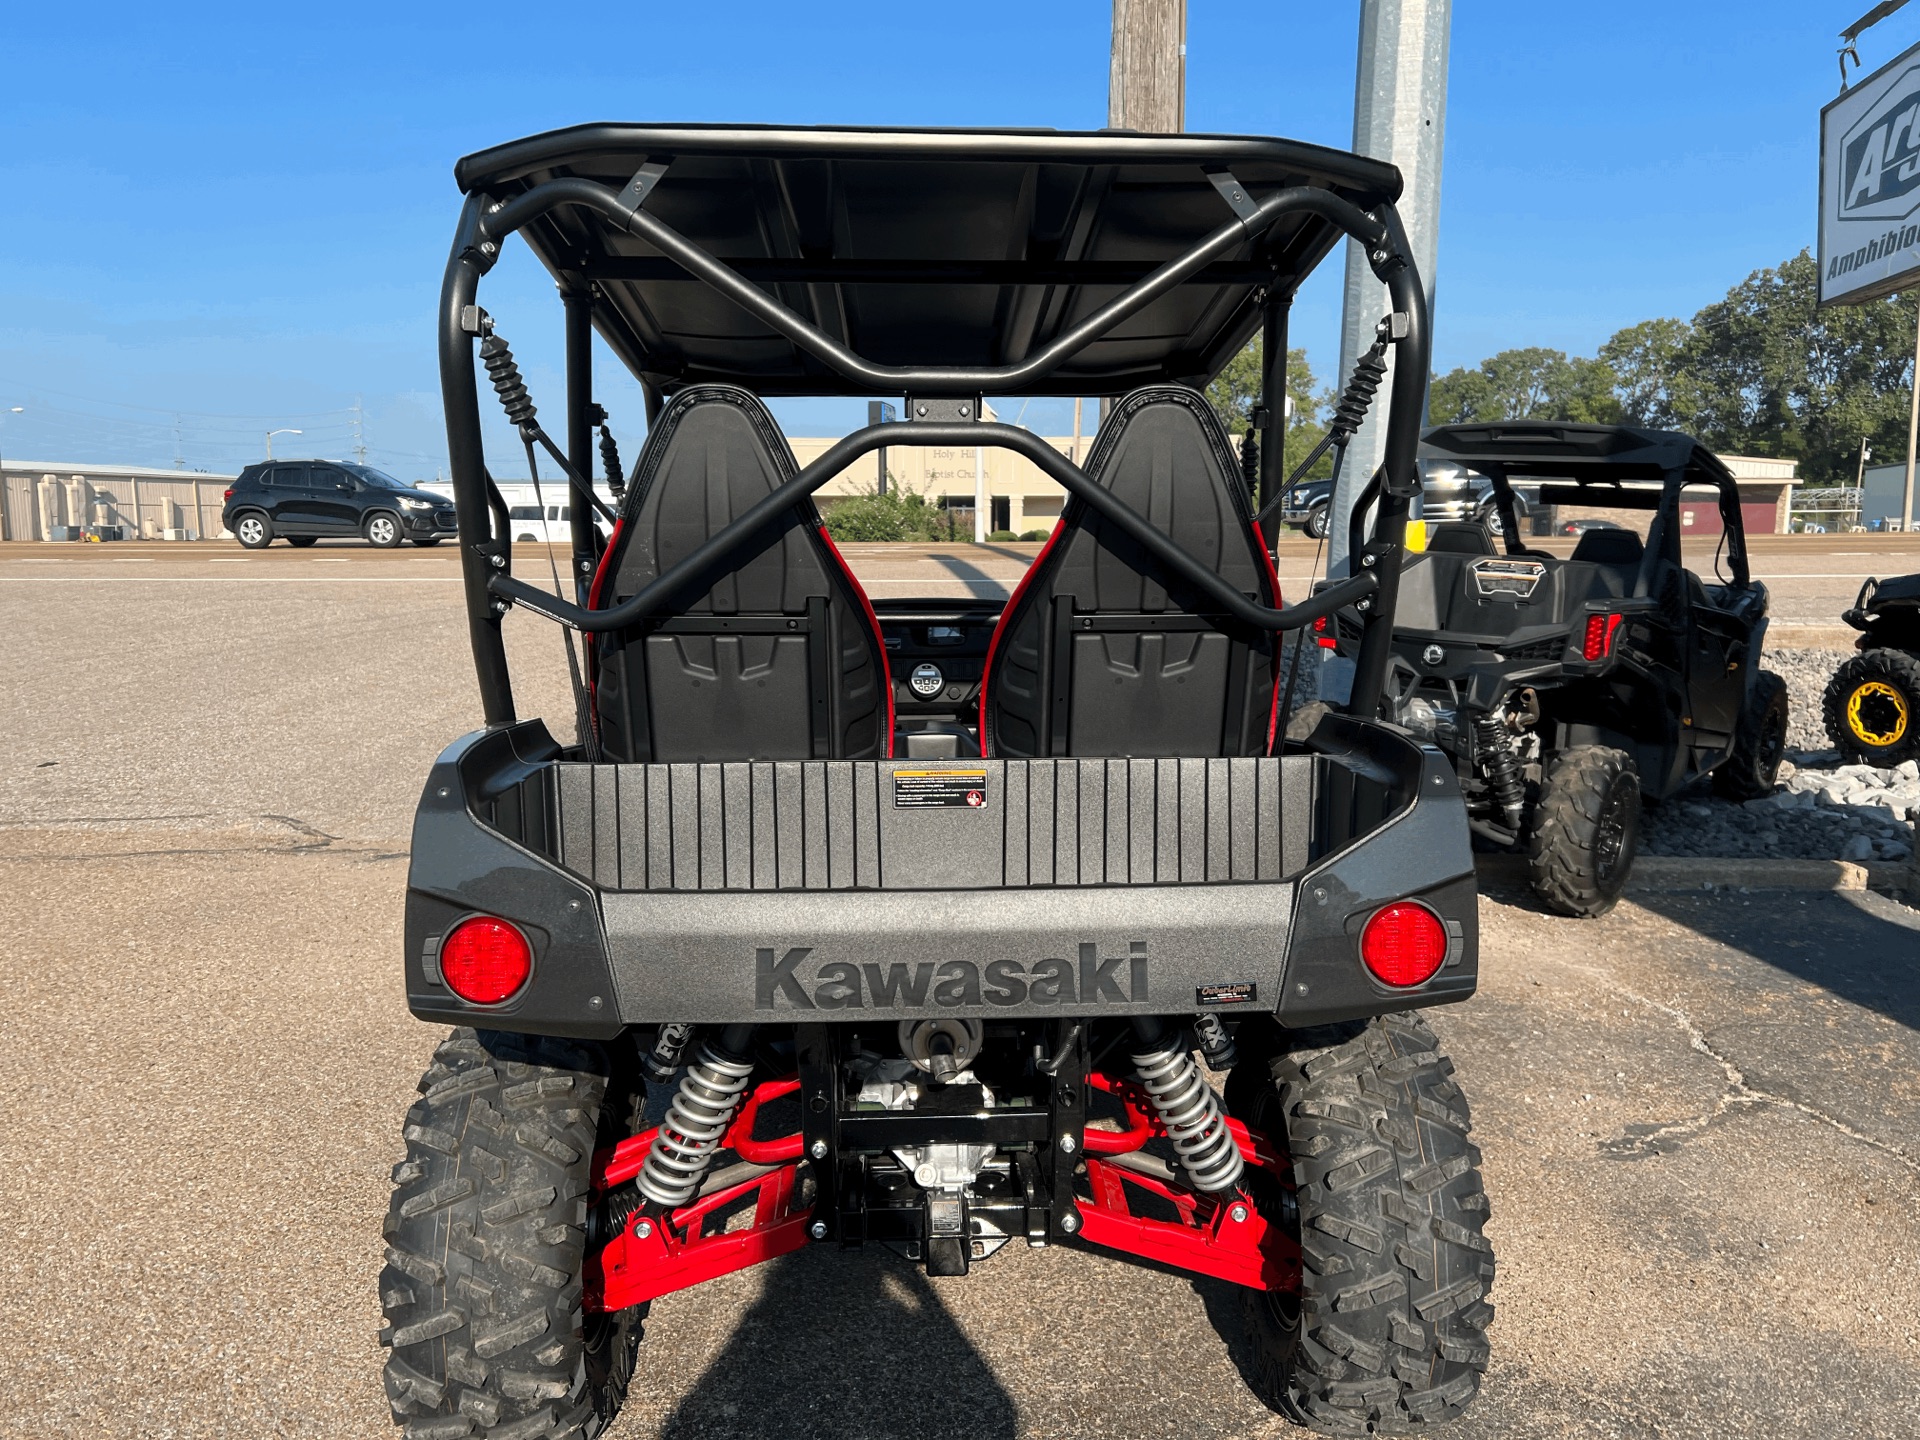 2023 Kawasaki Teryx4 S Special Edition in Dyersburg, Tennessee - Photo 8